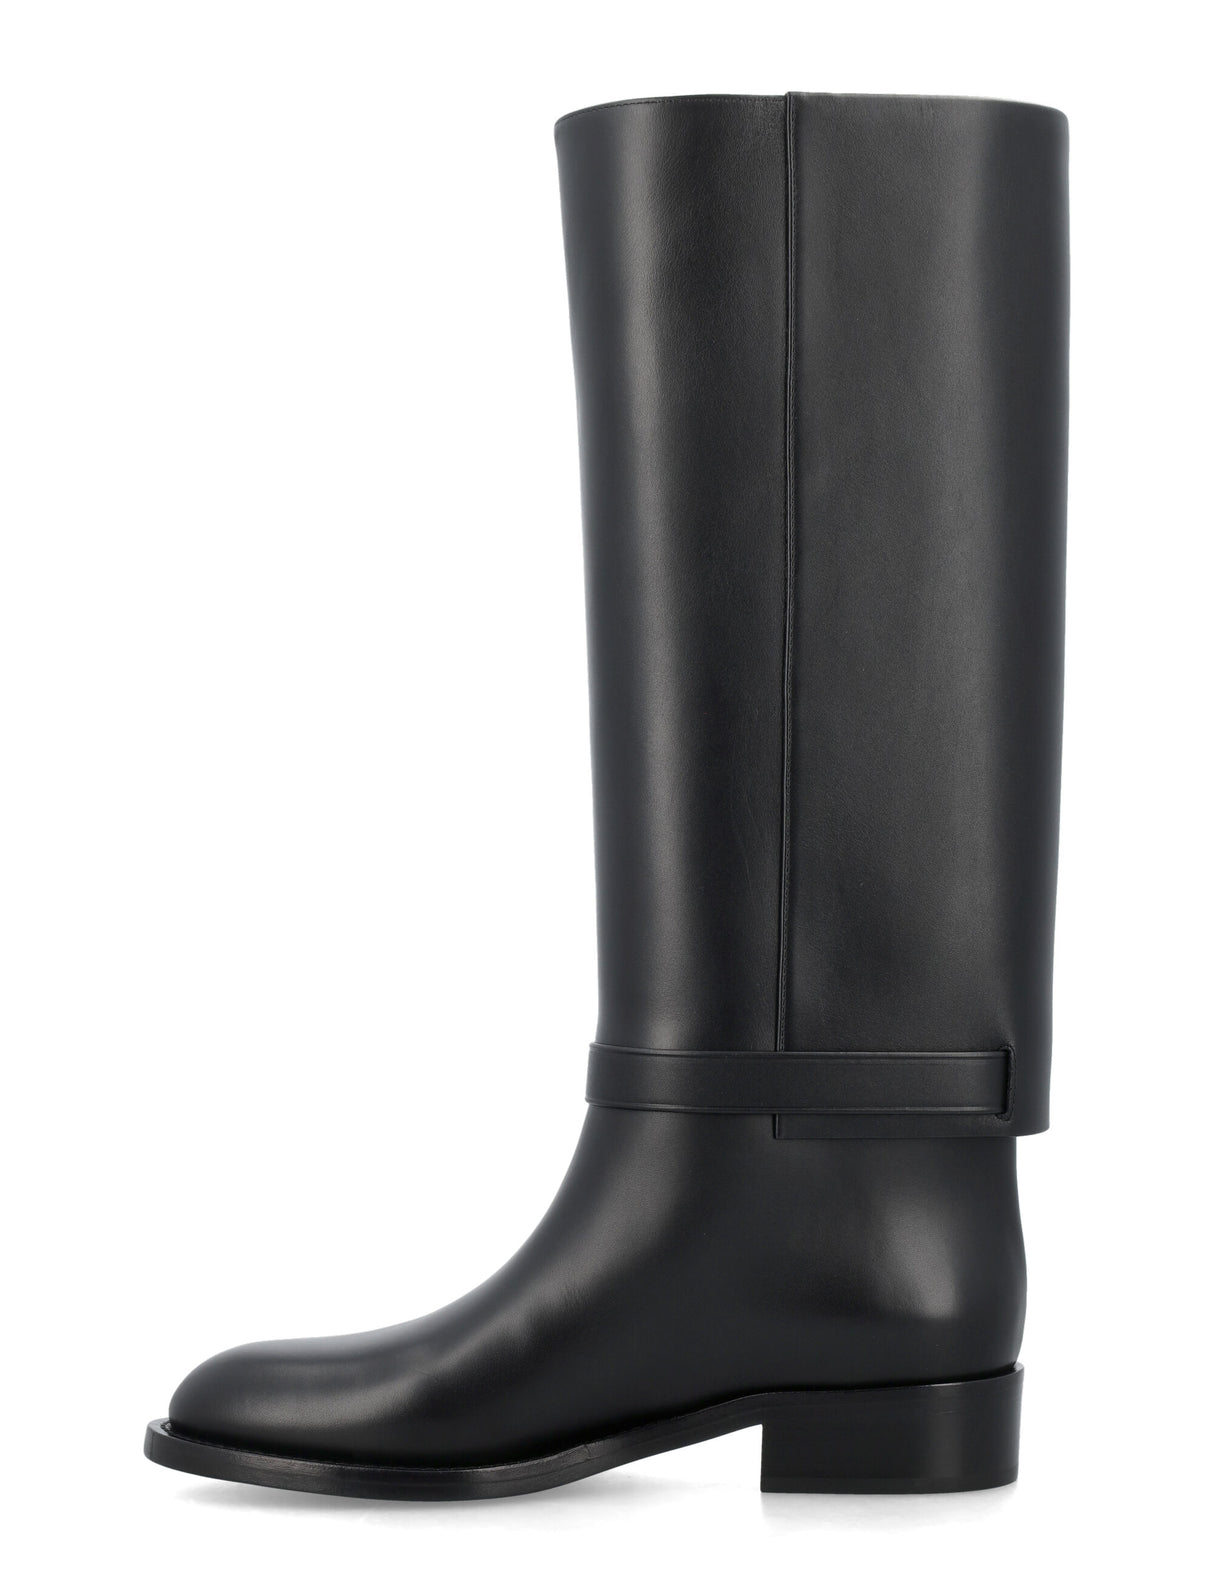 BURBERRY Black Leather Horse Boots for Women - FW23 Collection